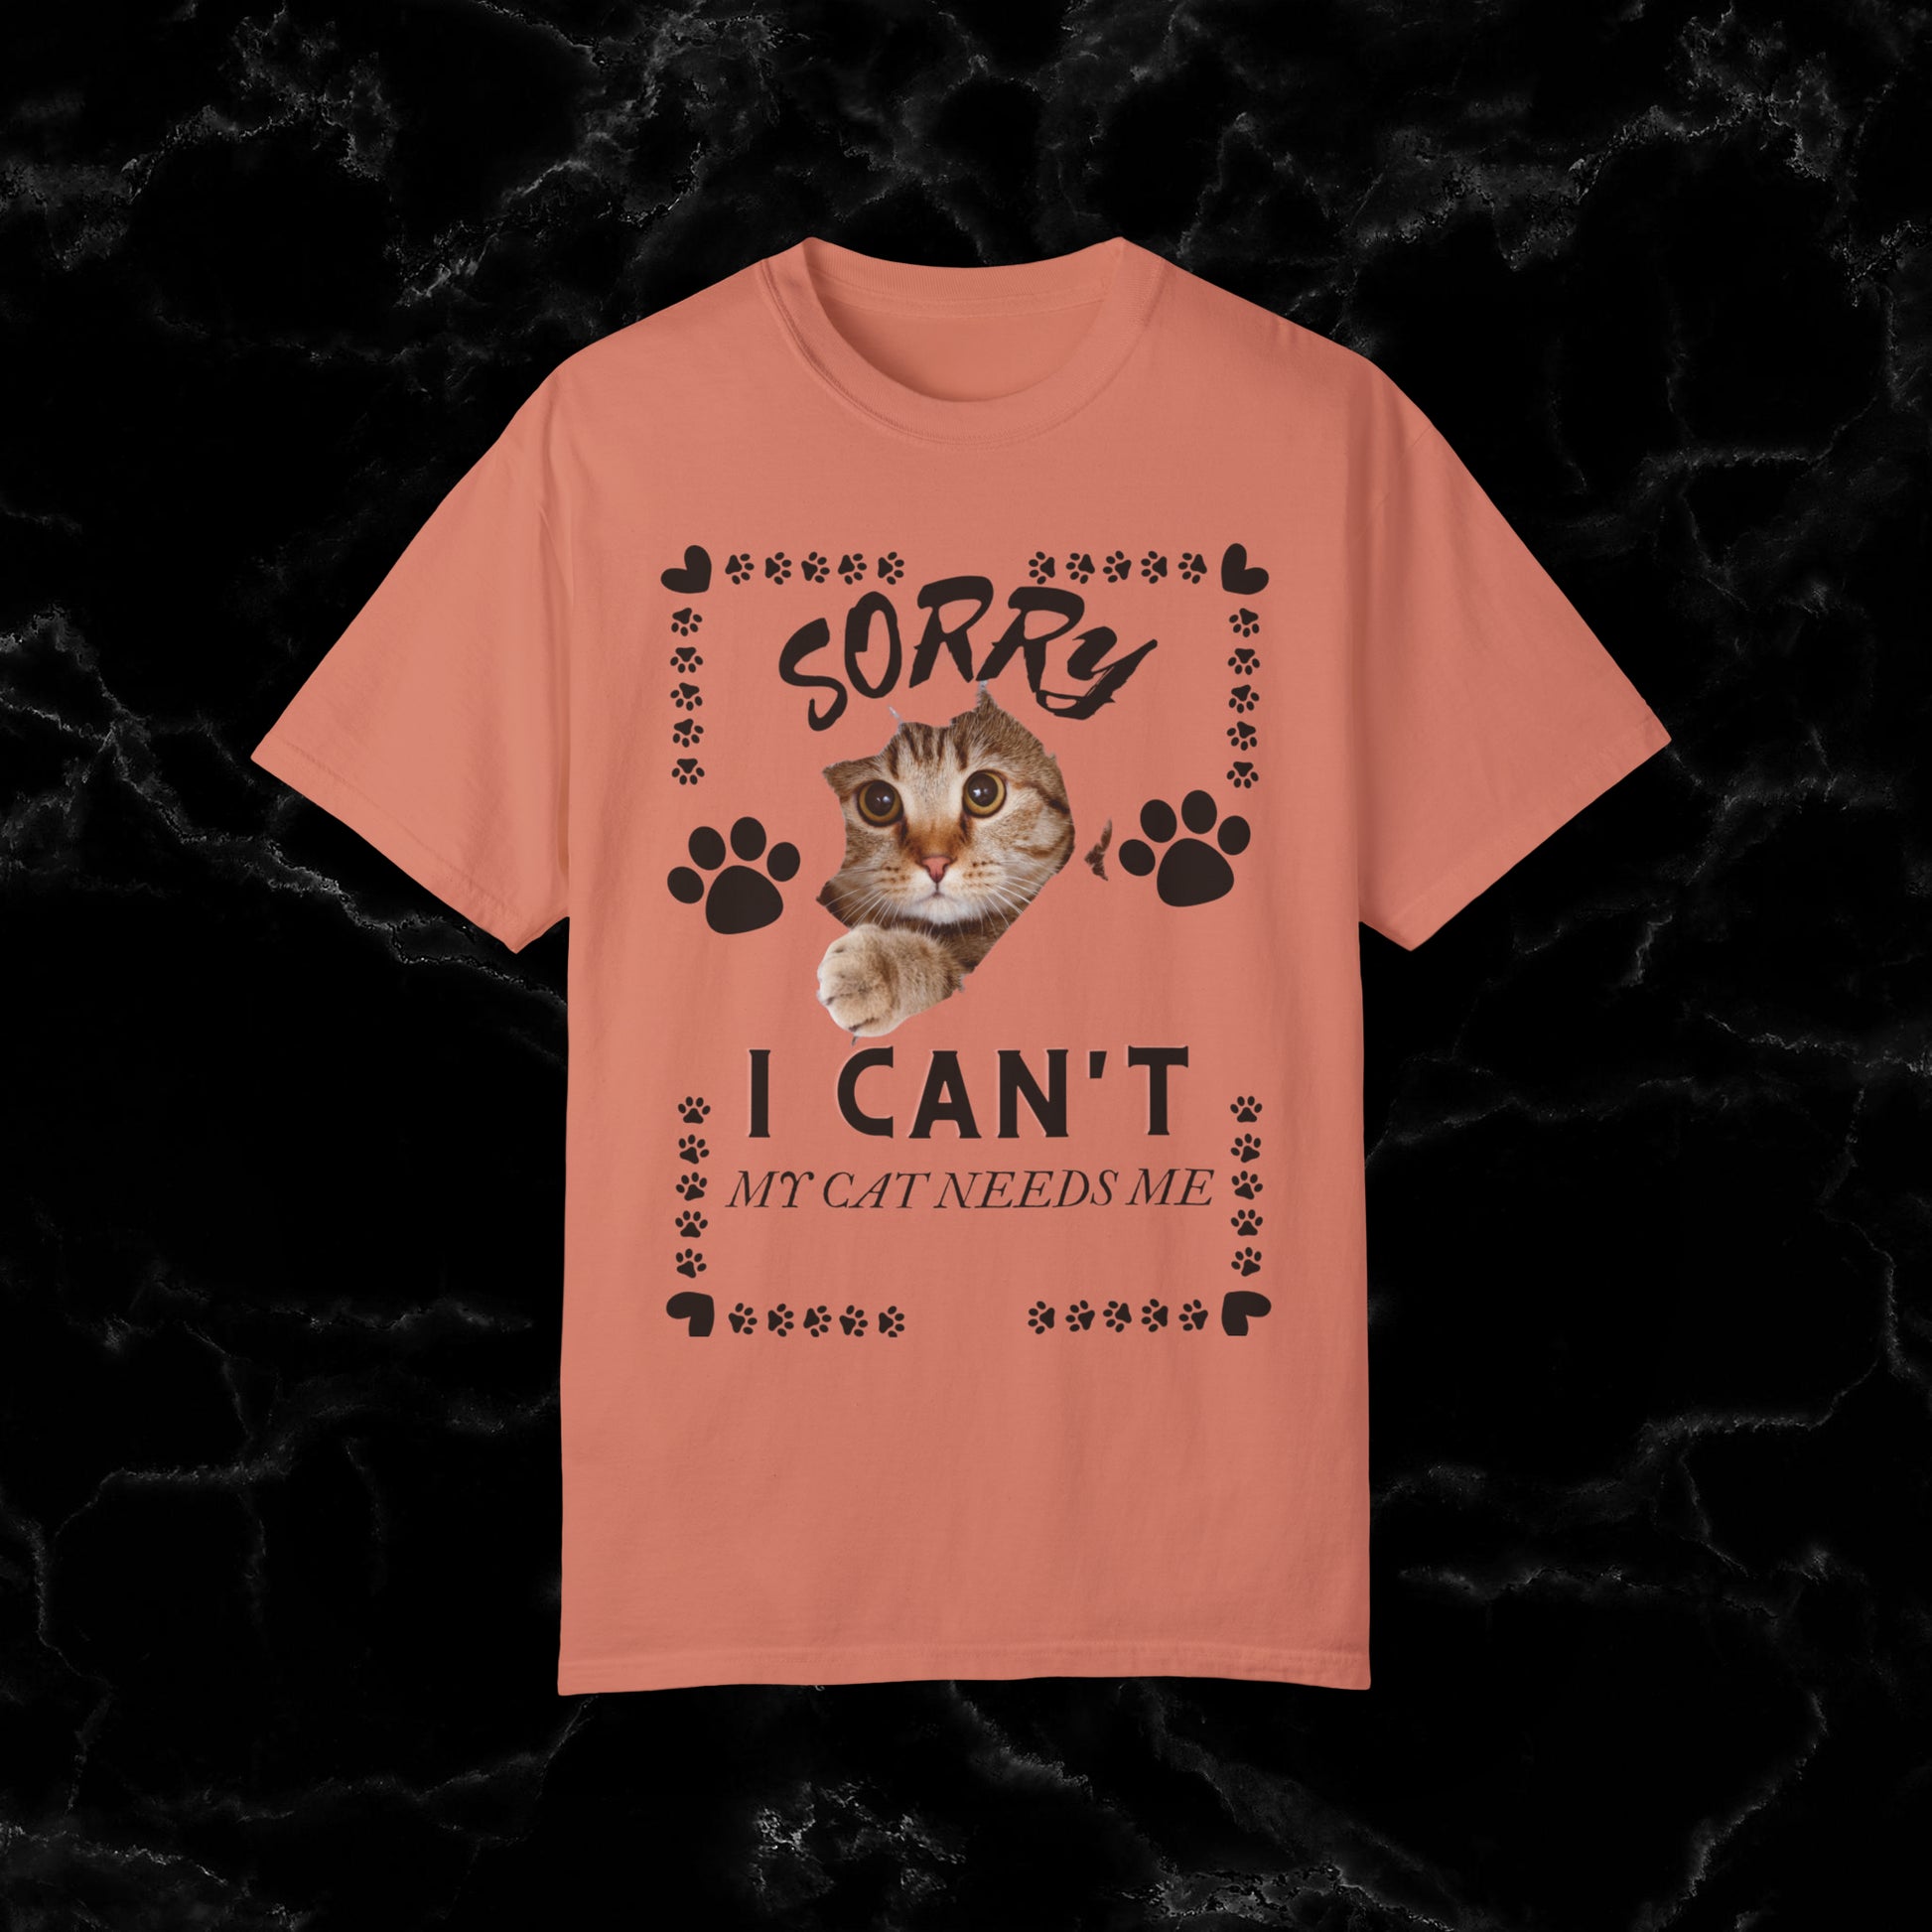 Sorry I Can't, My Cat Needs Me T-Shirt - Perfect Gift for Cat Moms and Animal Lovers T-Shirt Terracotta S 